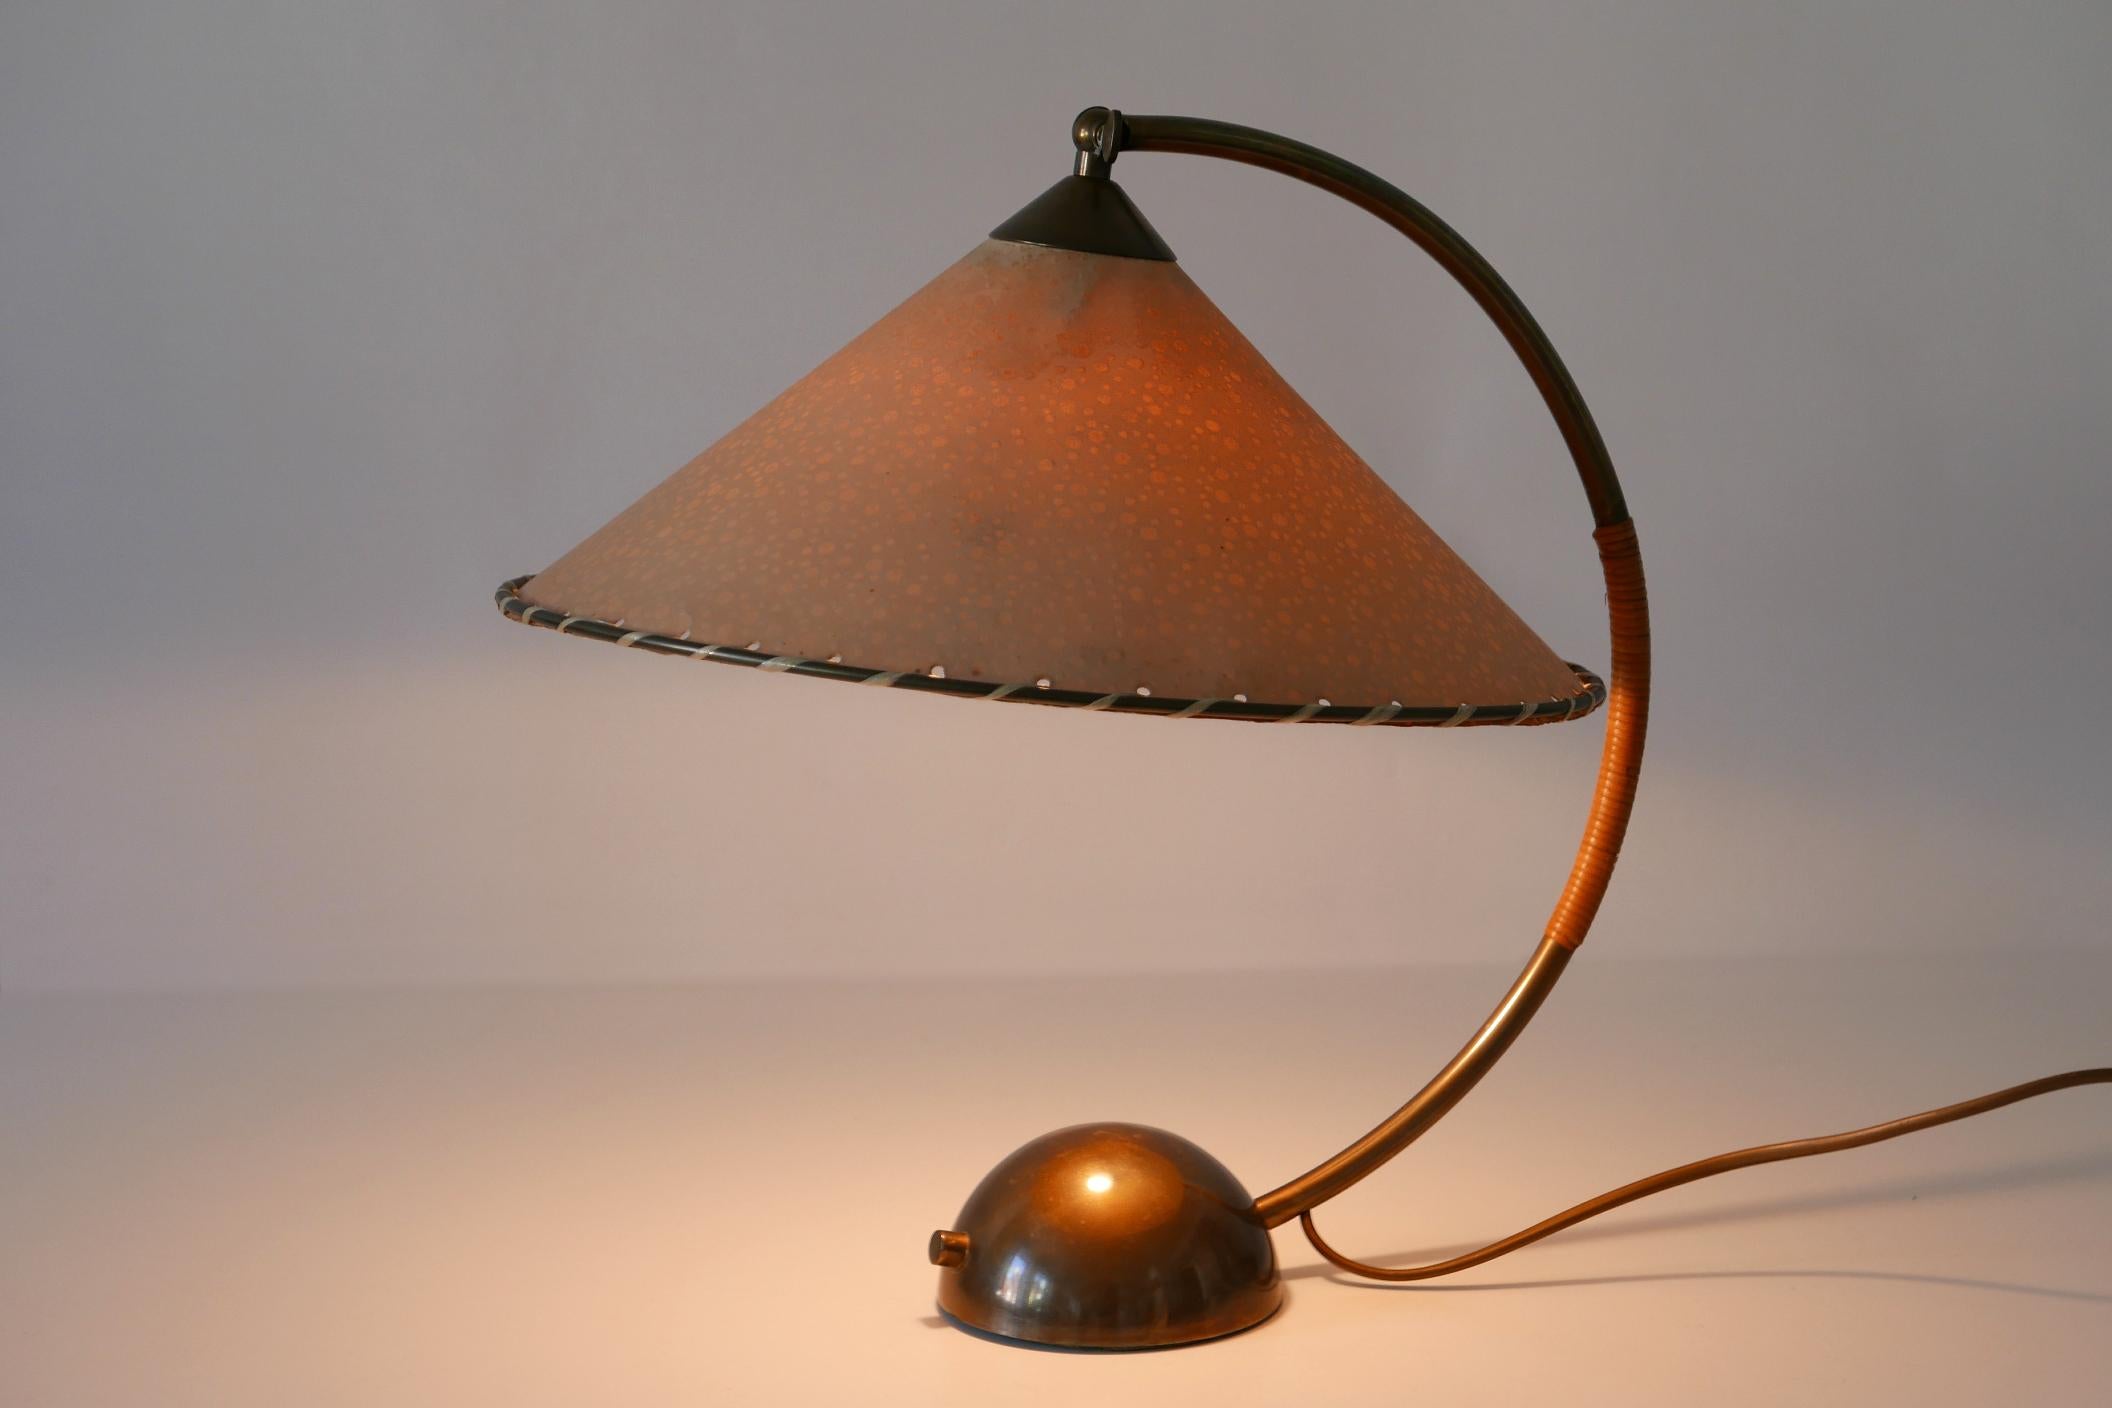 Parchment Paper Exceptional and Large Mid-Century Modern Table Lamp by Pitt Müller 1950s Germany